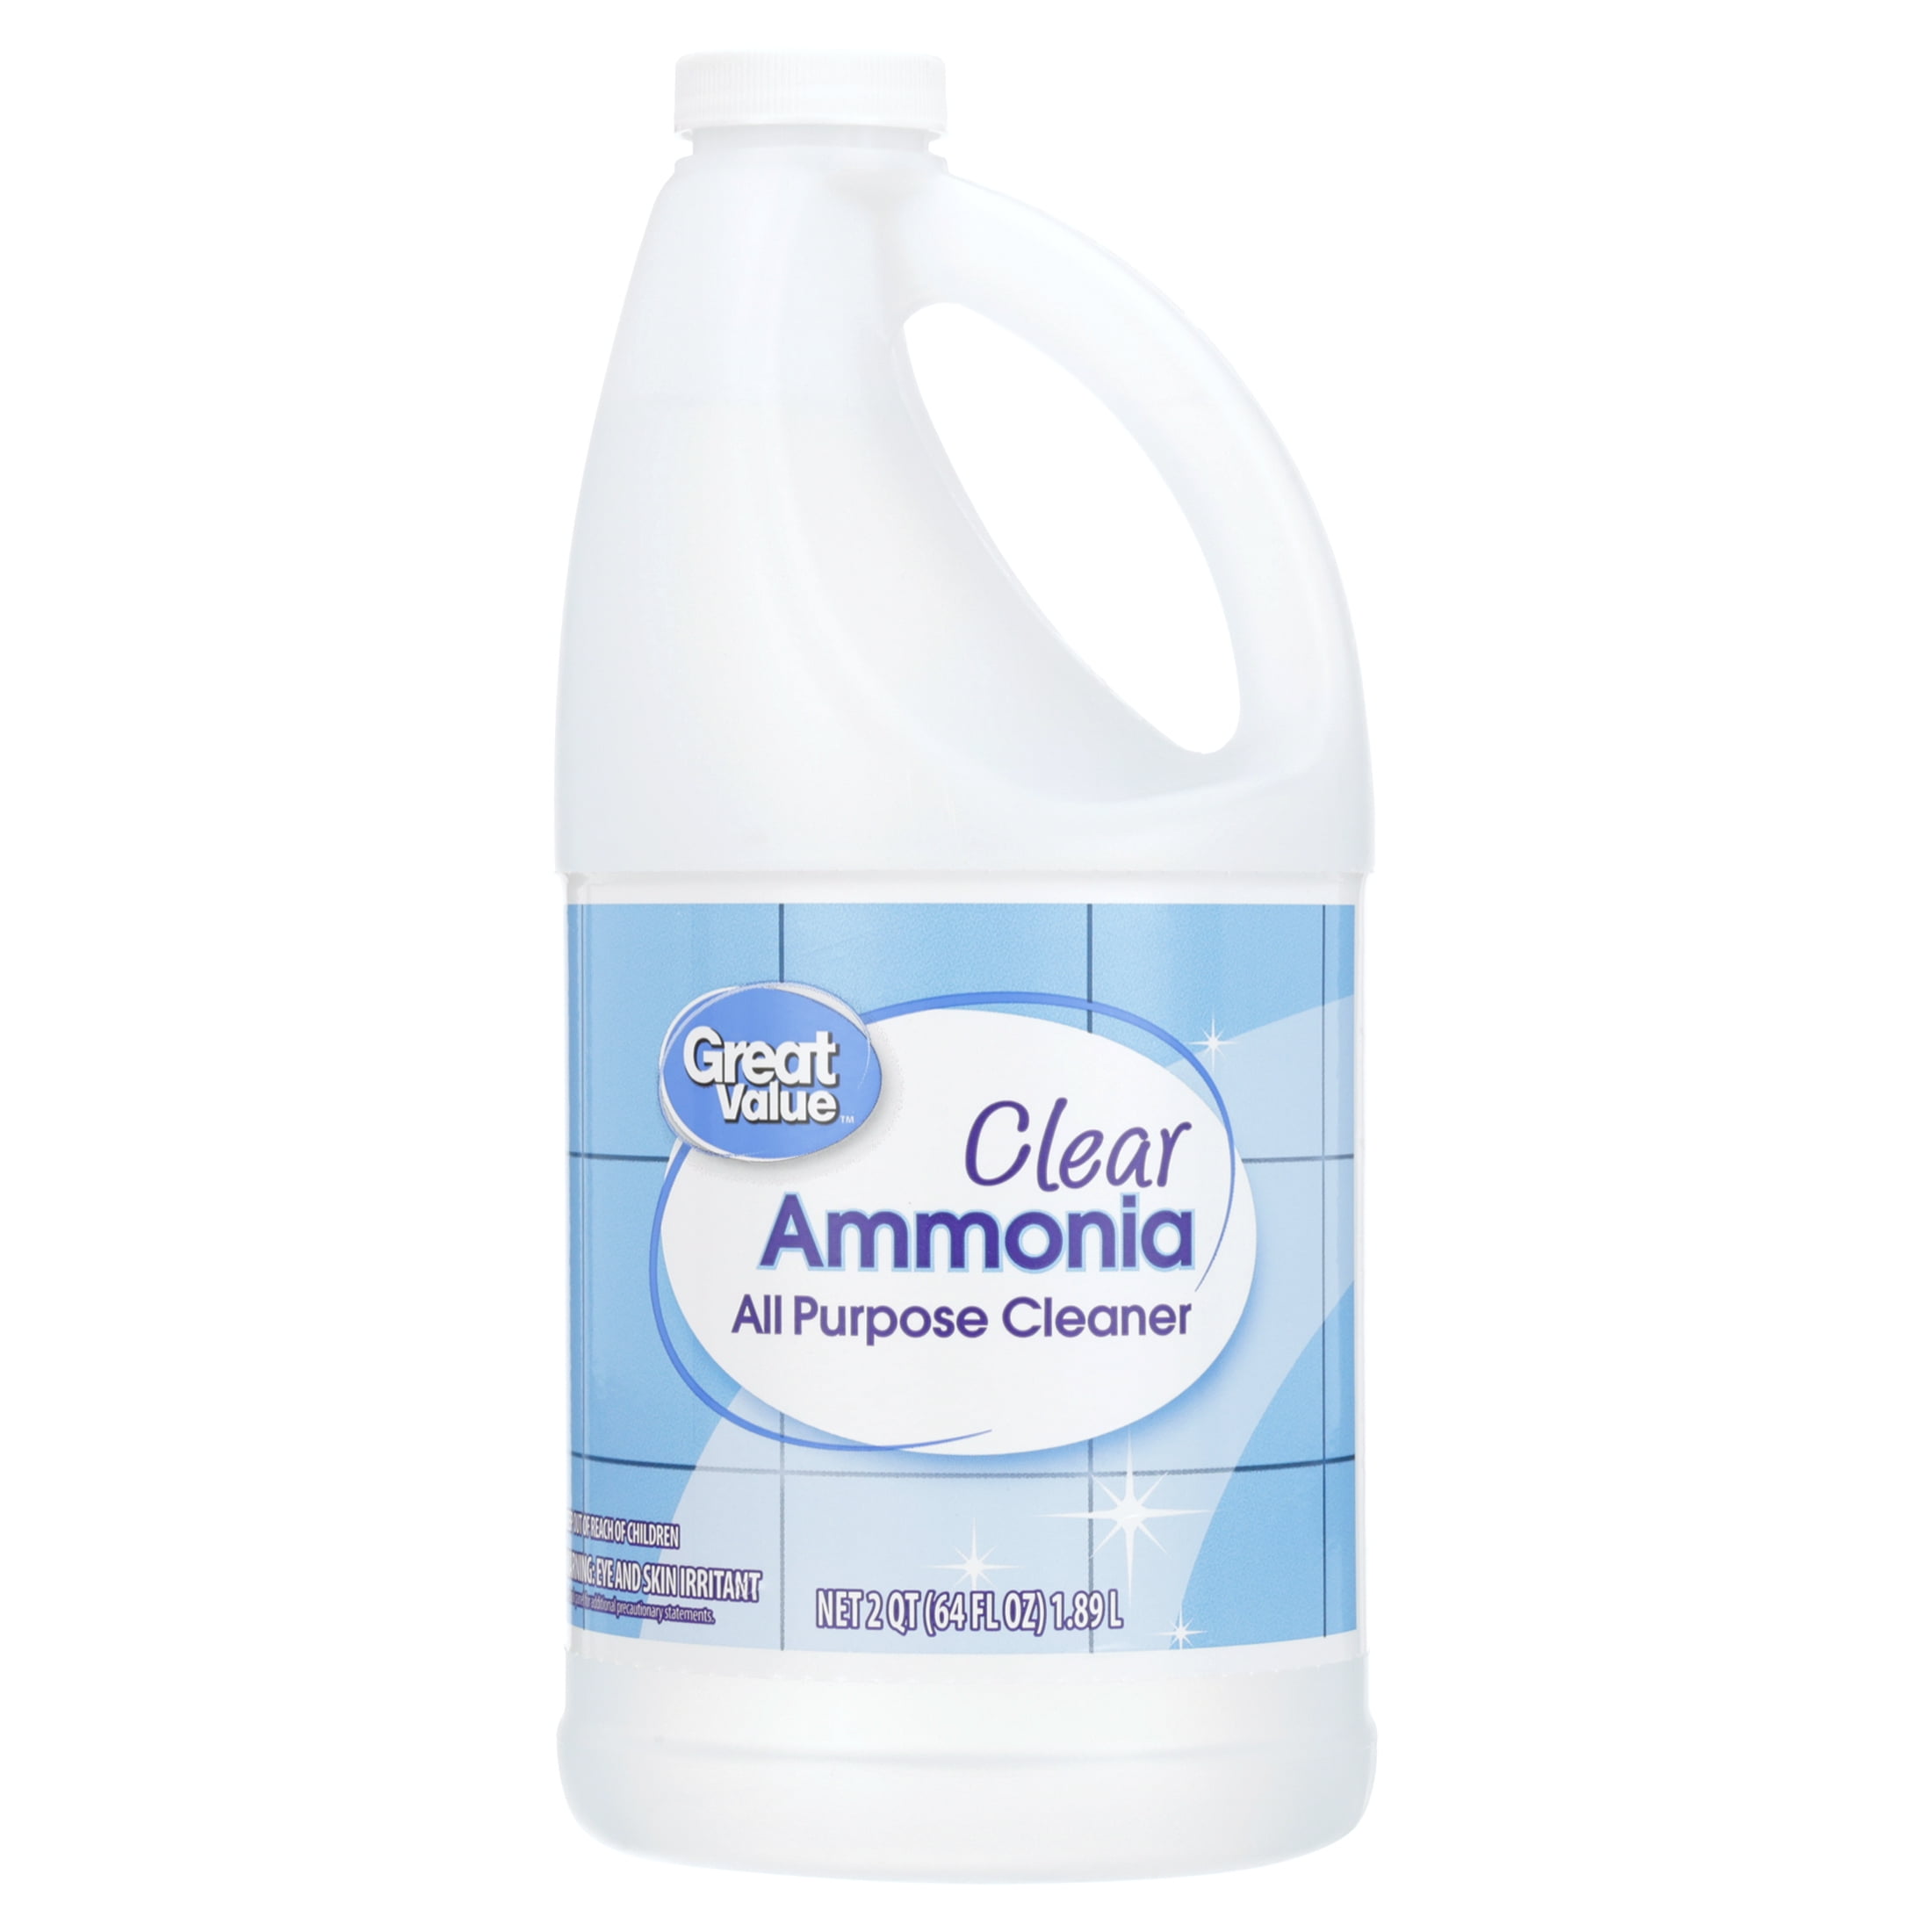 Great Value Clear Ammonia All-Purpose Cleaners, 64 Fluid Ounce